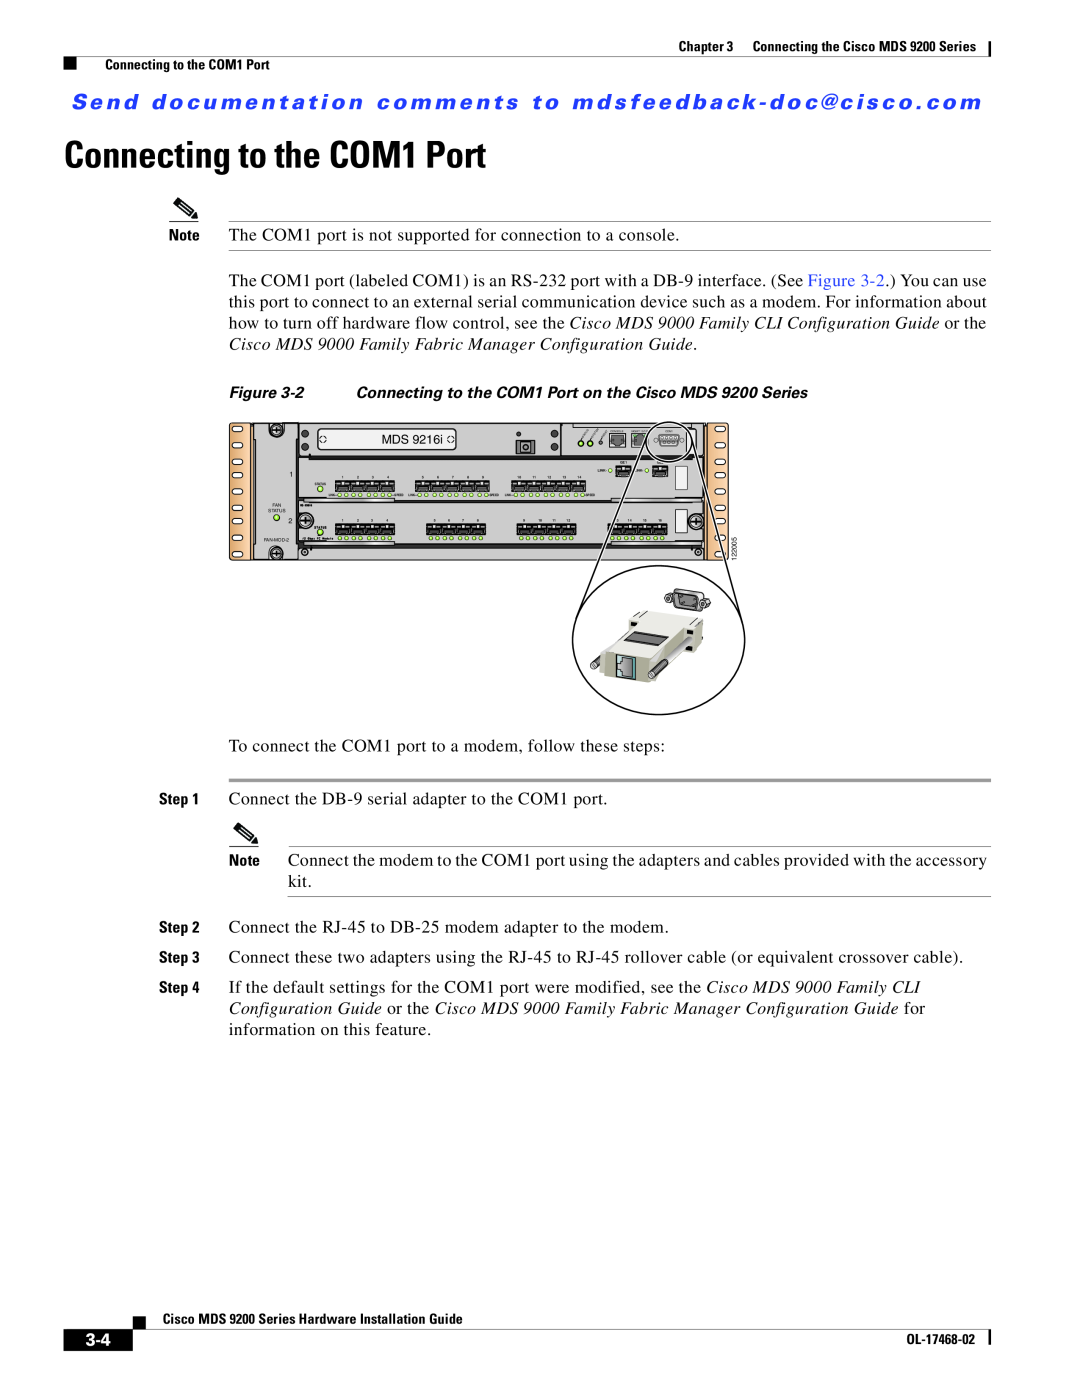 Cisco Systems MDS 9200 Series manual Connecting to the COM1 Port 